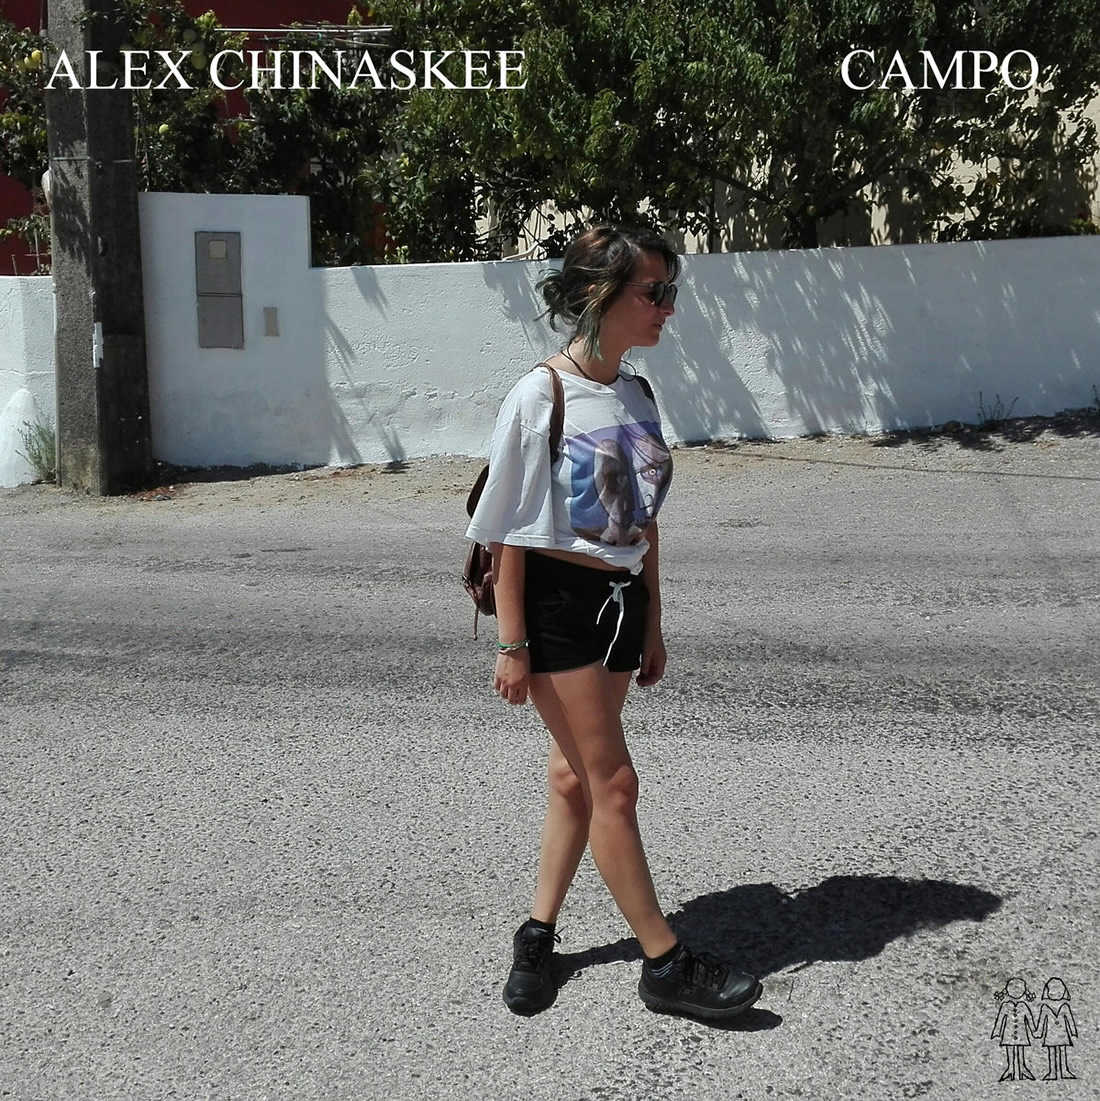 Alex Chinaskee – “Campo” (EP, French Sisters Experience Records and Co)